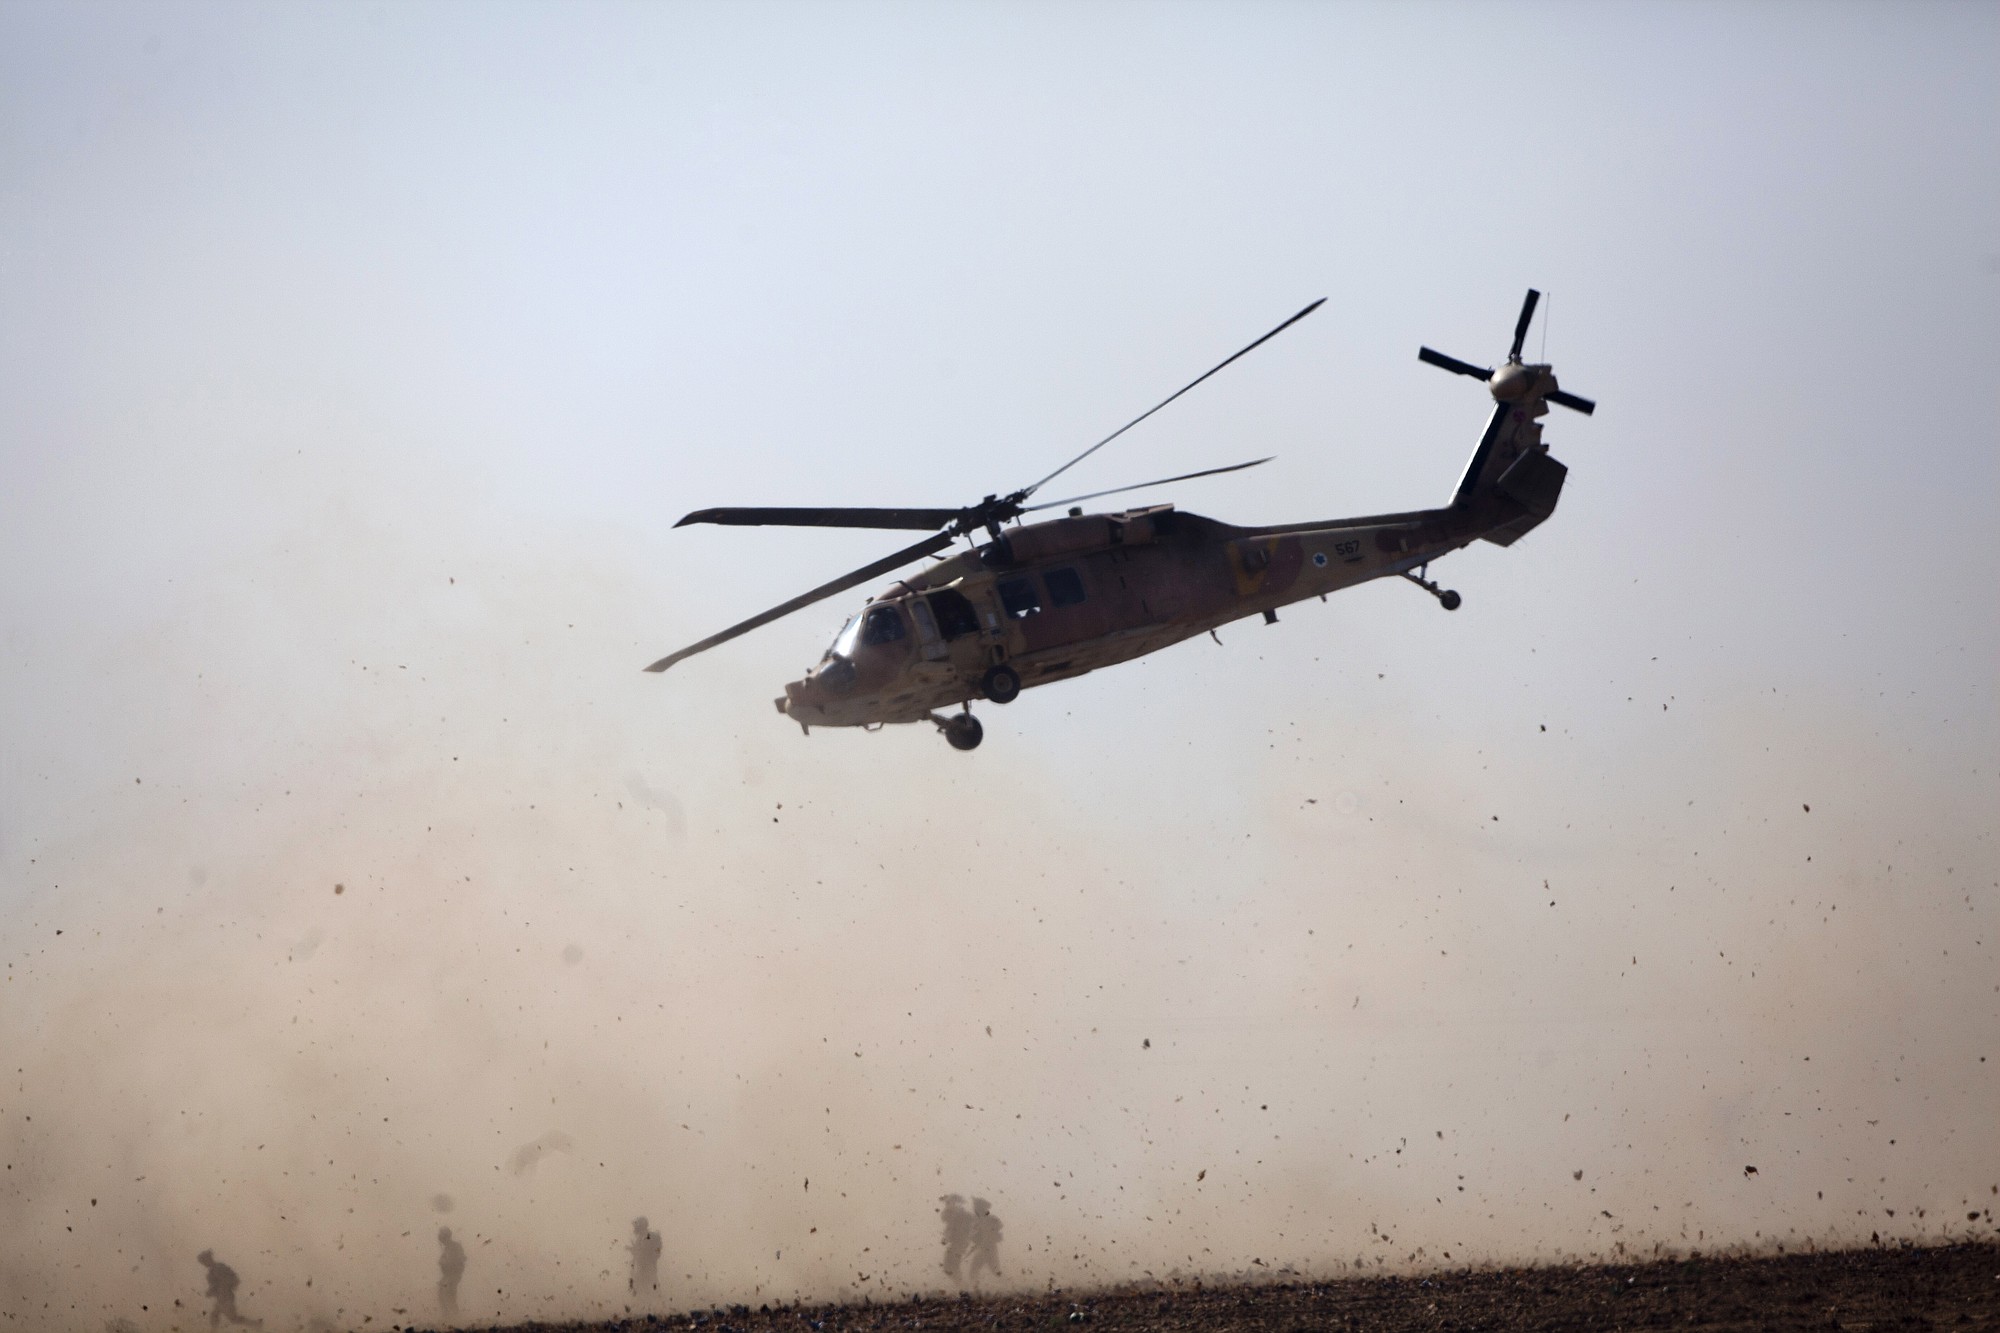 Israeli helicopter takes off with a wounded soldier near the Israel and Gaza border Thursday.